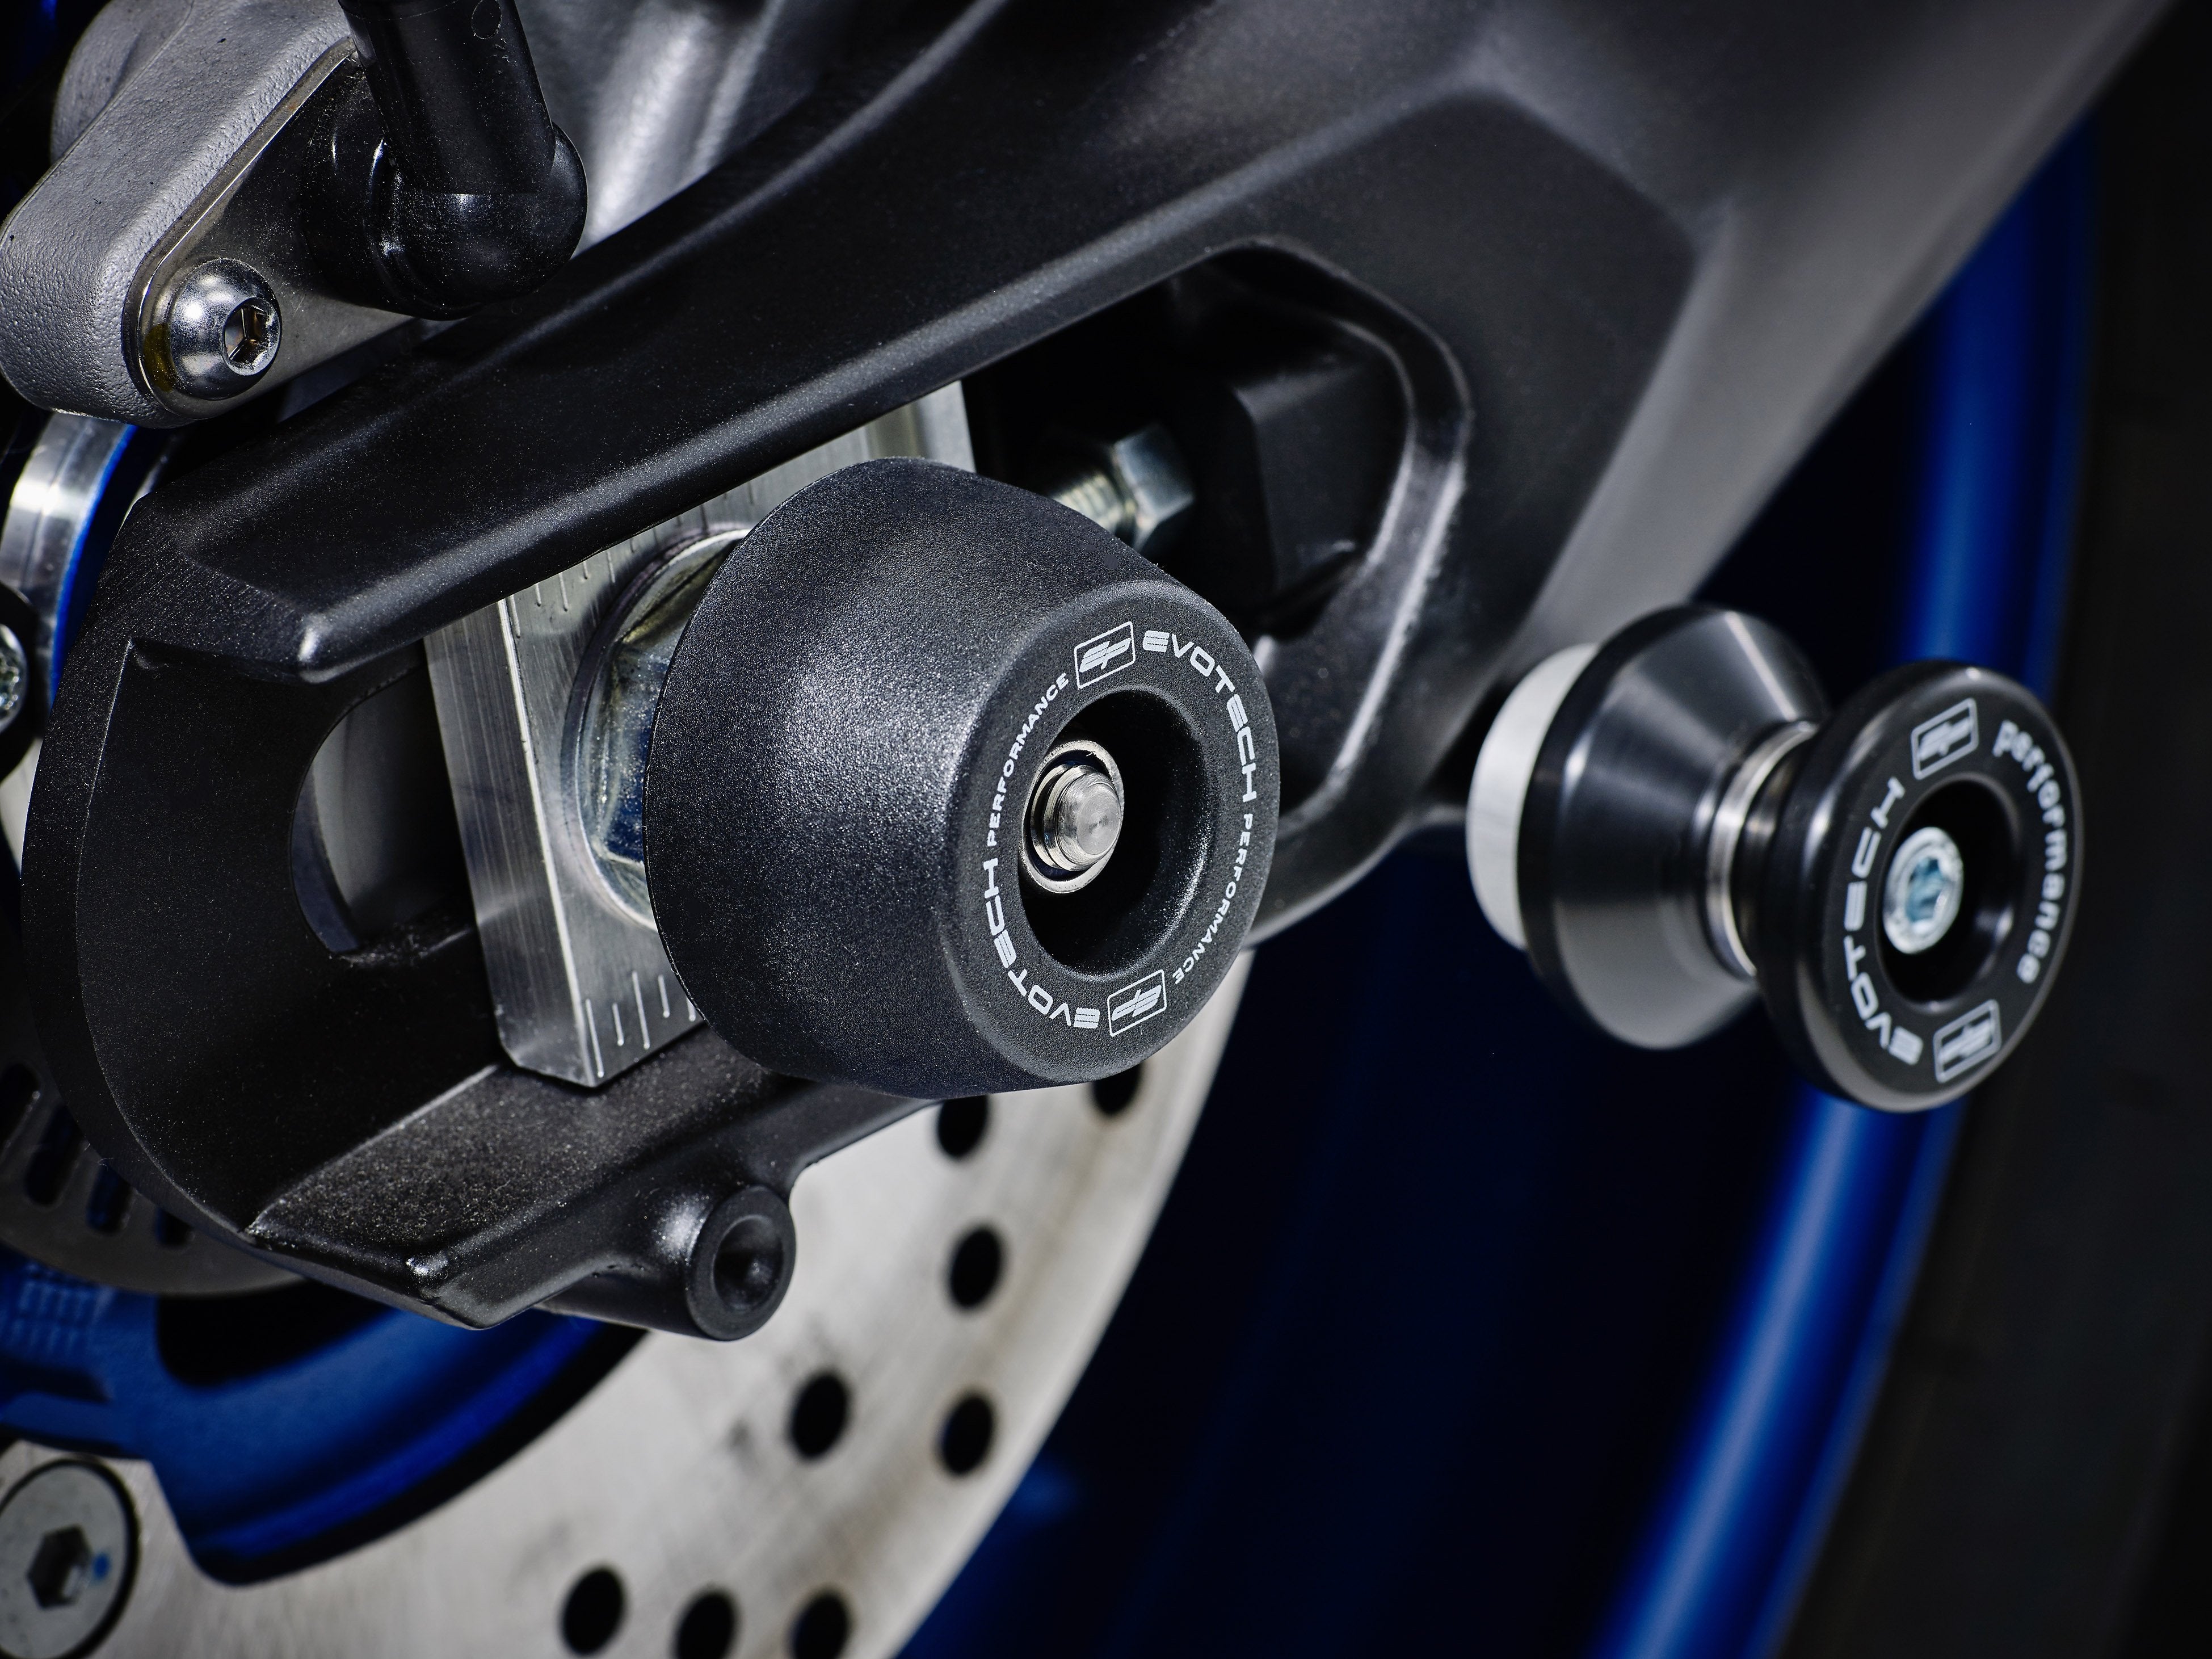 EP Spindle Bobbins Kit crash protection for the rear swingarm of the Yamaha MT-09, fitted near EP Paddock Stand Bobbins.  